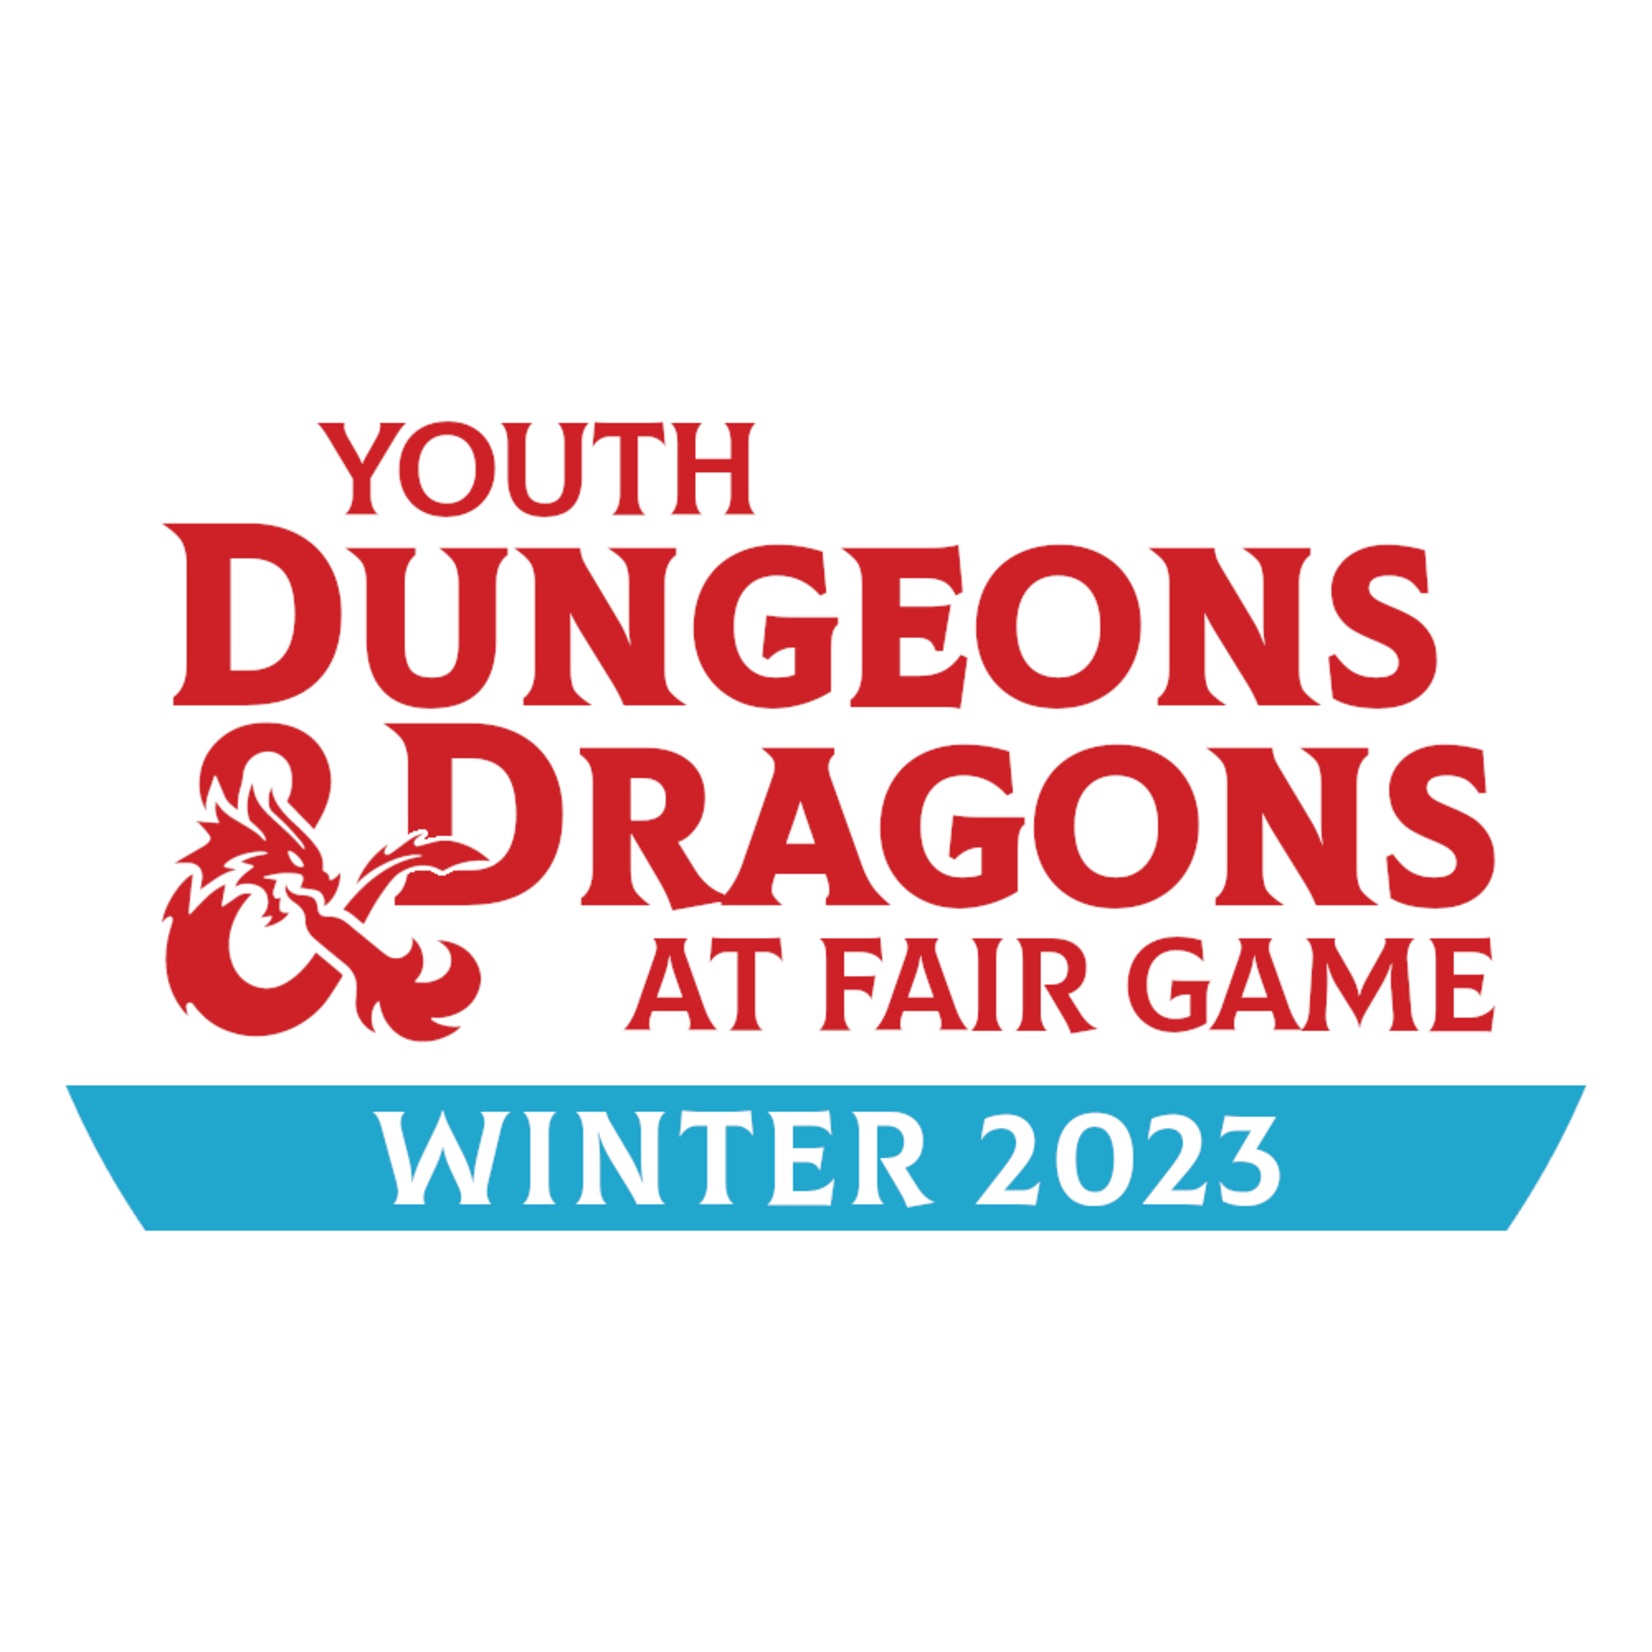 Fair Game YDND Winter 2023: Group DC1 - Wednesday Downers Grove 4-6 PM (Ages 10-15)